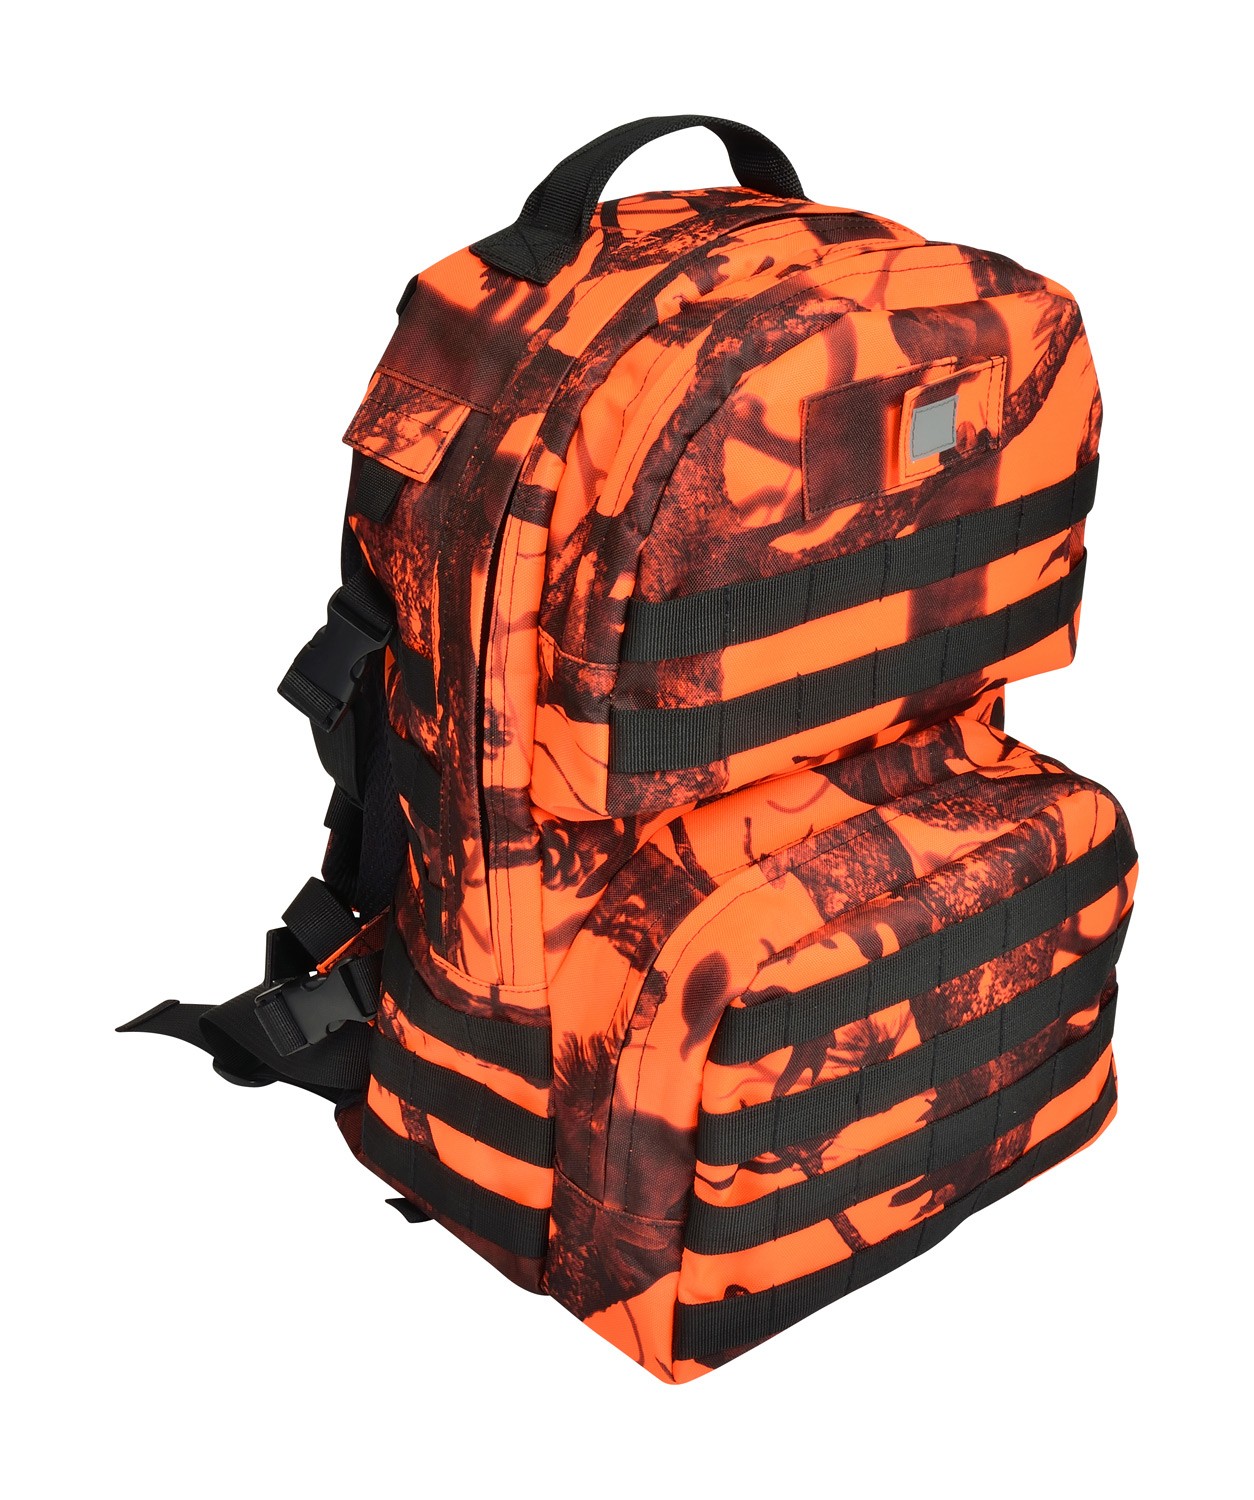 Sac à dos Percussion 40L GhostCamo B&B, MADE IN CHASSE - Equipements de chasse